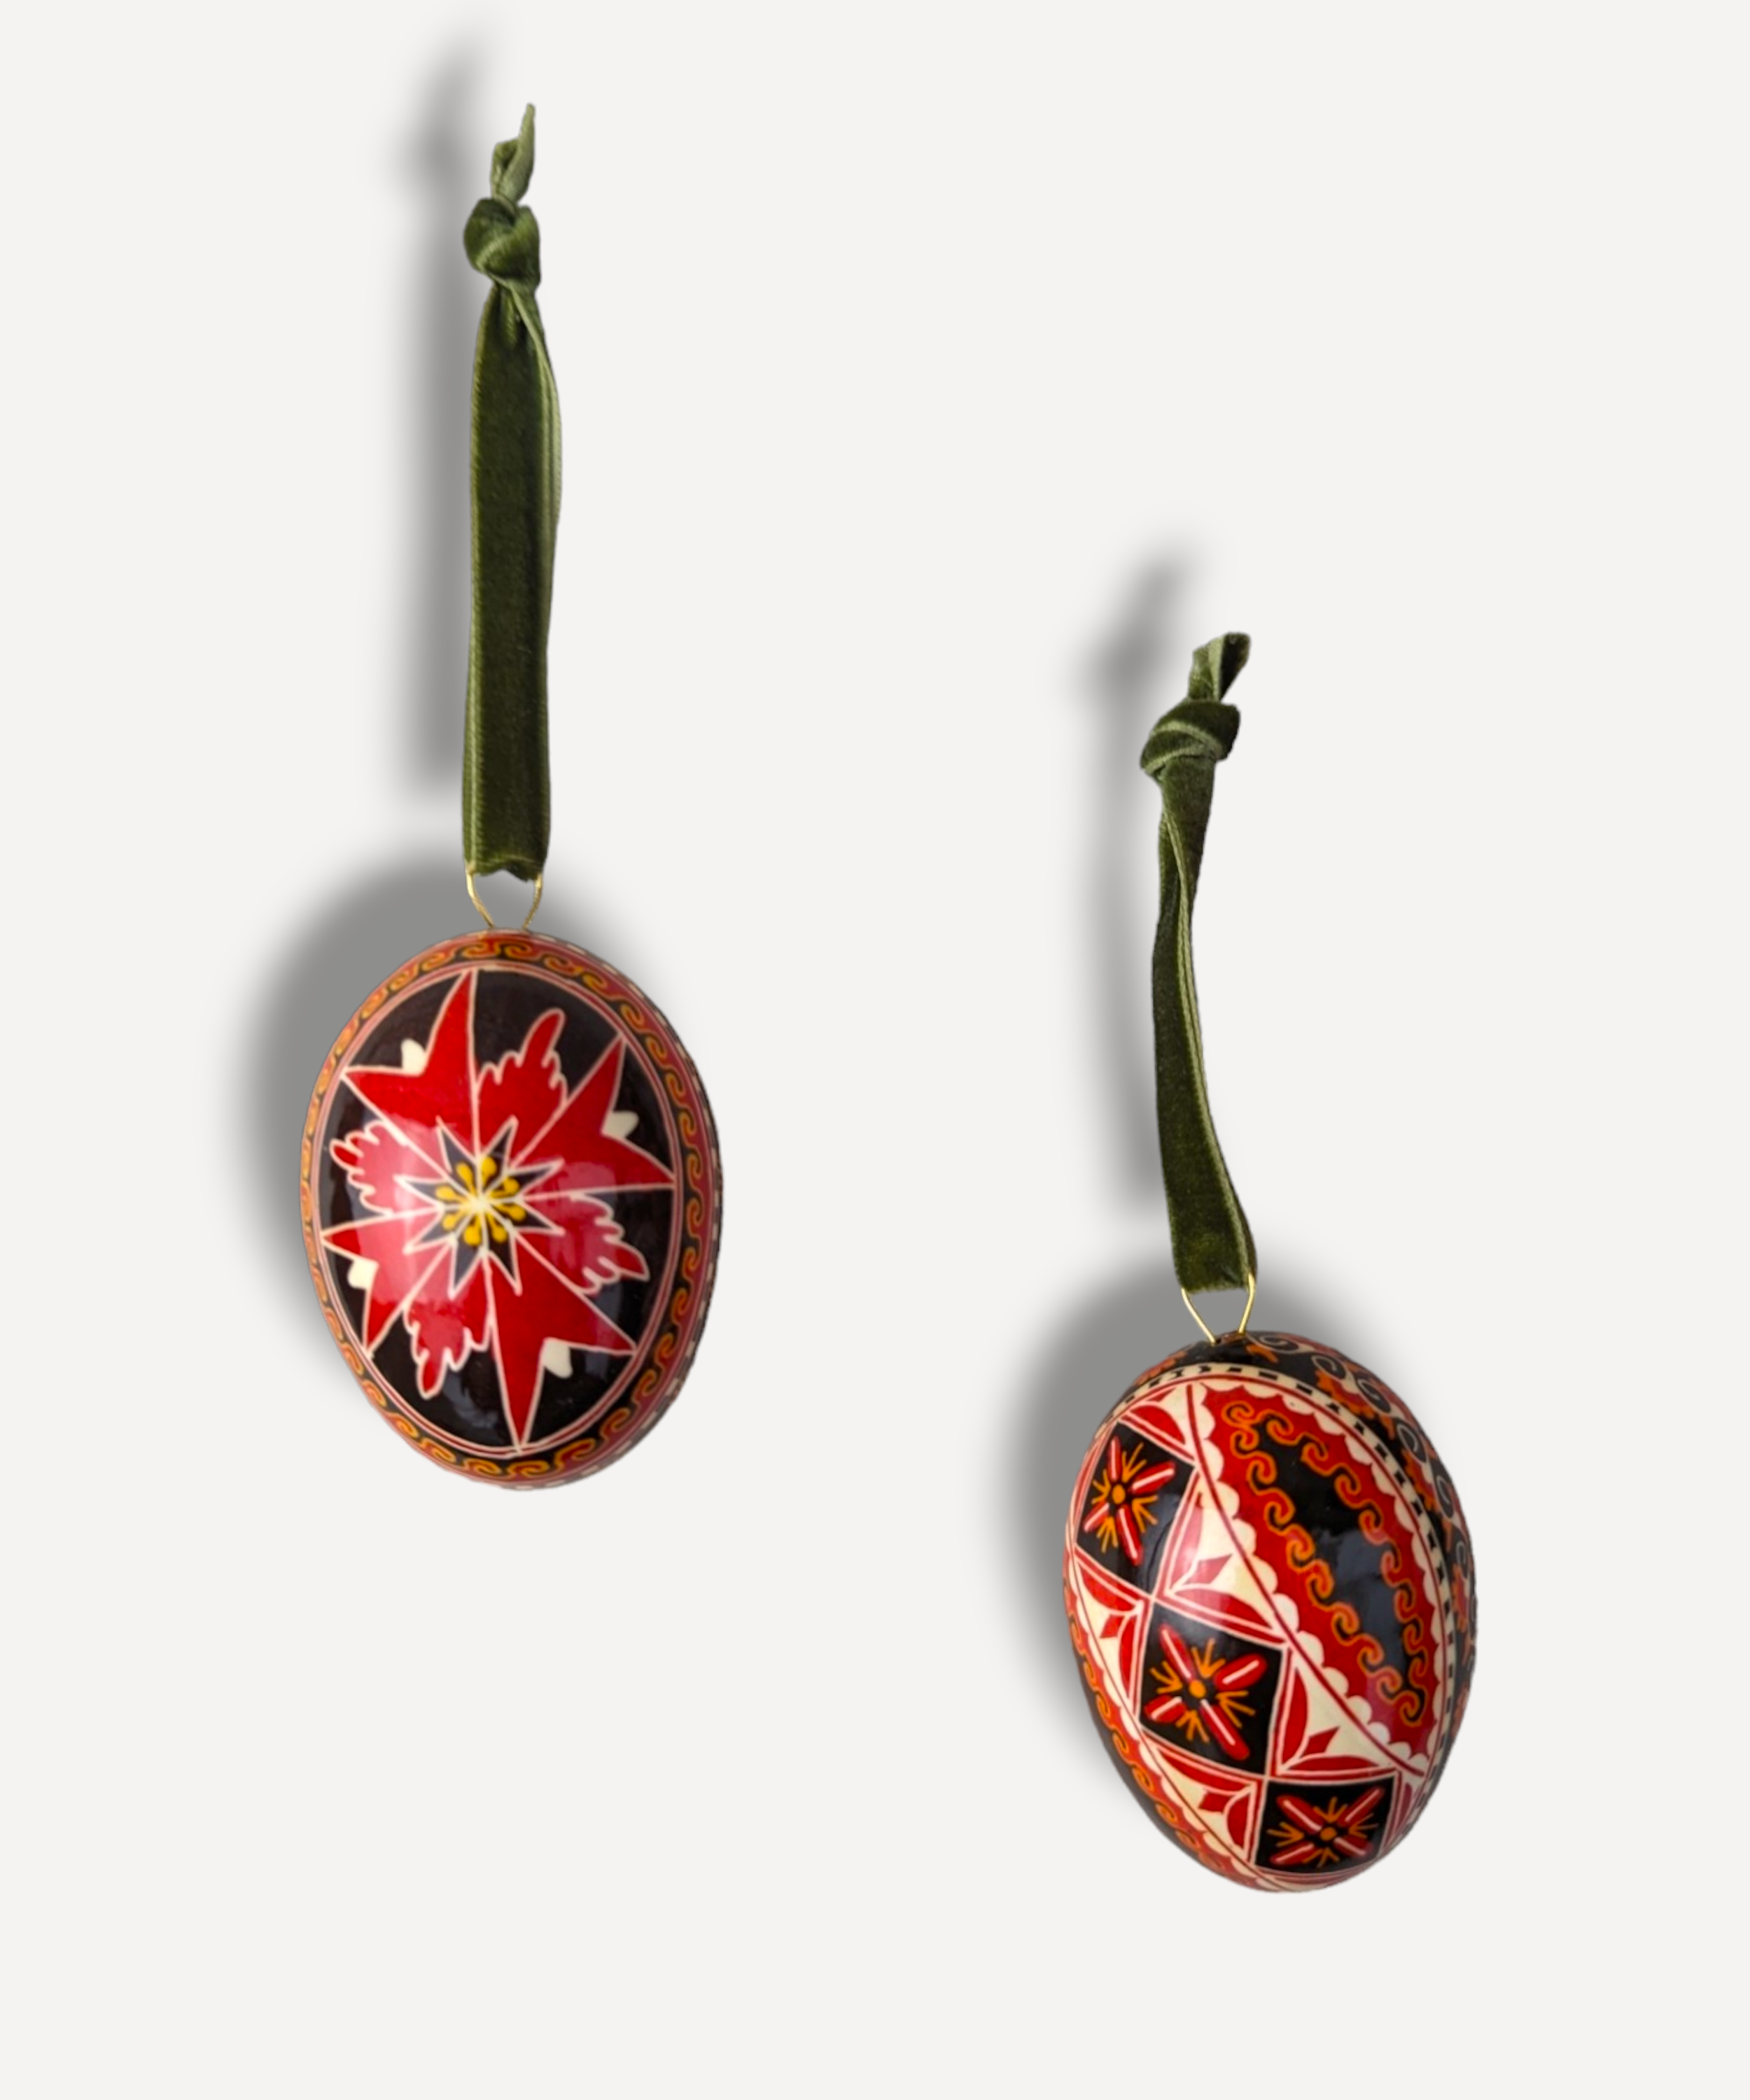 Traditional Hand-Painted Eggs